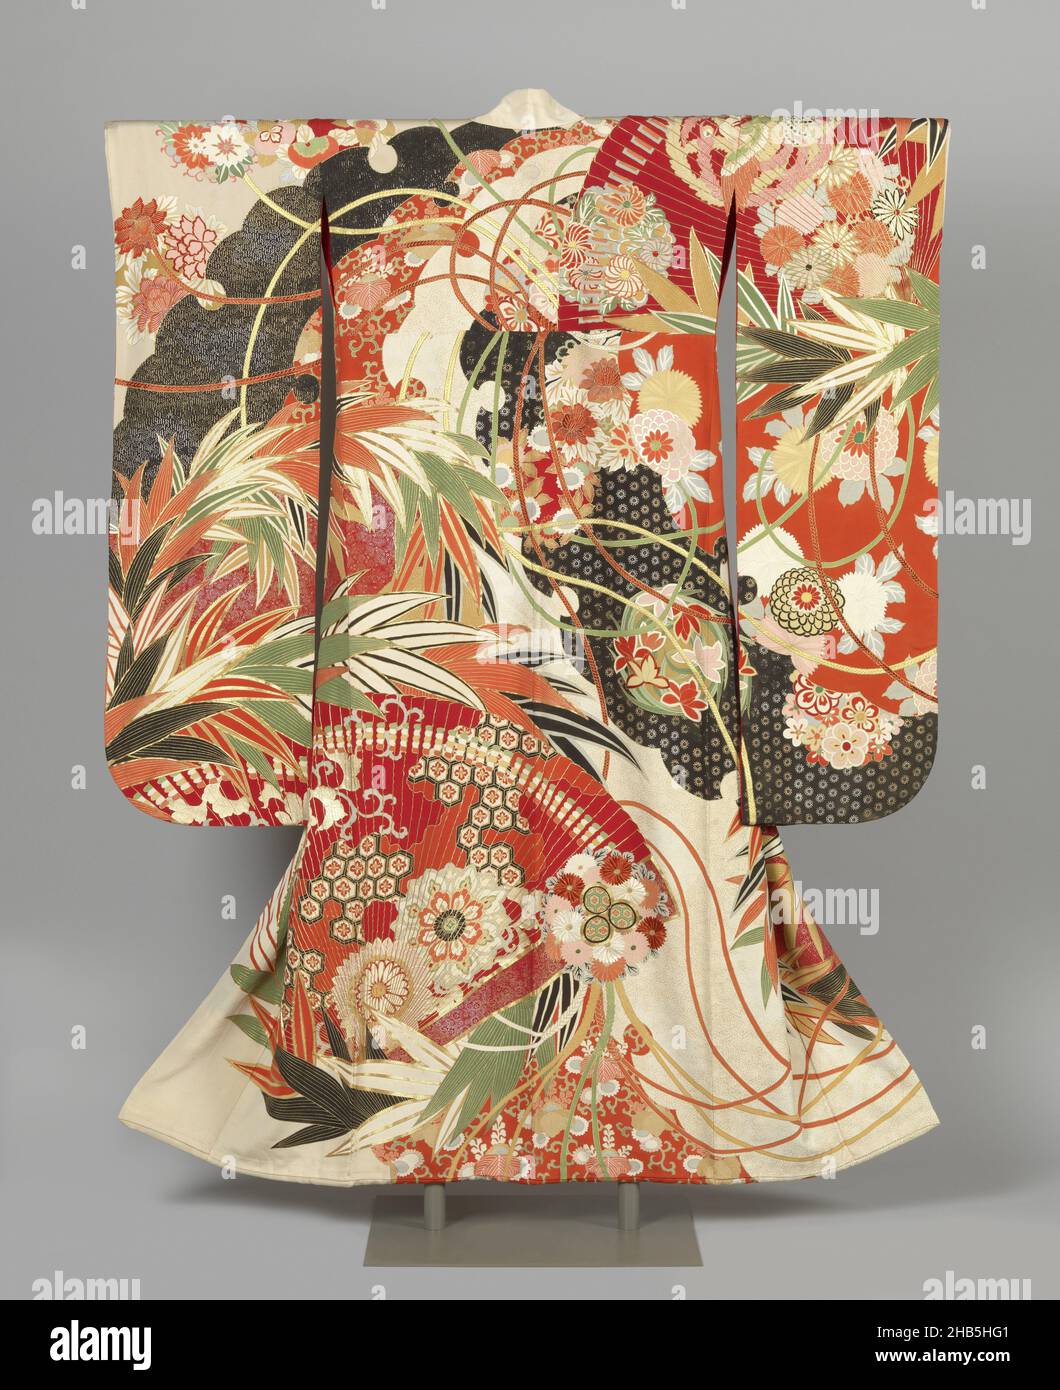 Kimono for an unmarried woman, Formal long-sleeved kimono for an unmarried young woman (furisode), decorated all over with large fans, snowflake, bamboo, chrysanthemum and other plant motifs, with bulbs on cords traversing the composition. Creamy white crepe silk with yuzen decoration in mainly red, green and pink, with detailing in silver and gold thread, gold and silver foil. Lining of red silk. Three family crests of chrysanthemums., maker: anonymous, Japan, 1905 - 1920, silk, embroidering, painting, height 130 cm × width 166 cm Stock Photo